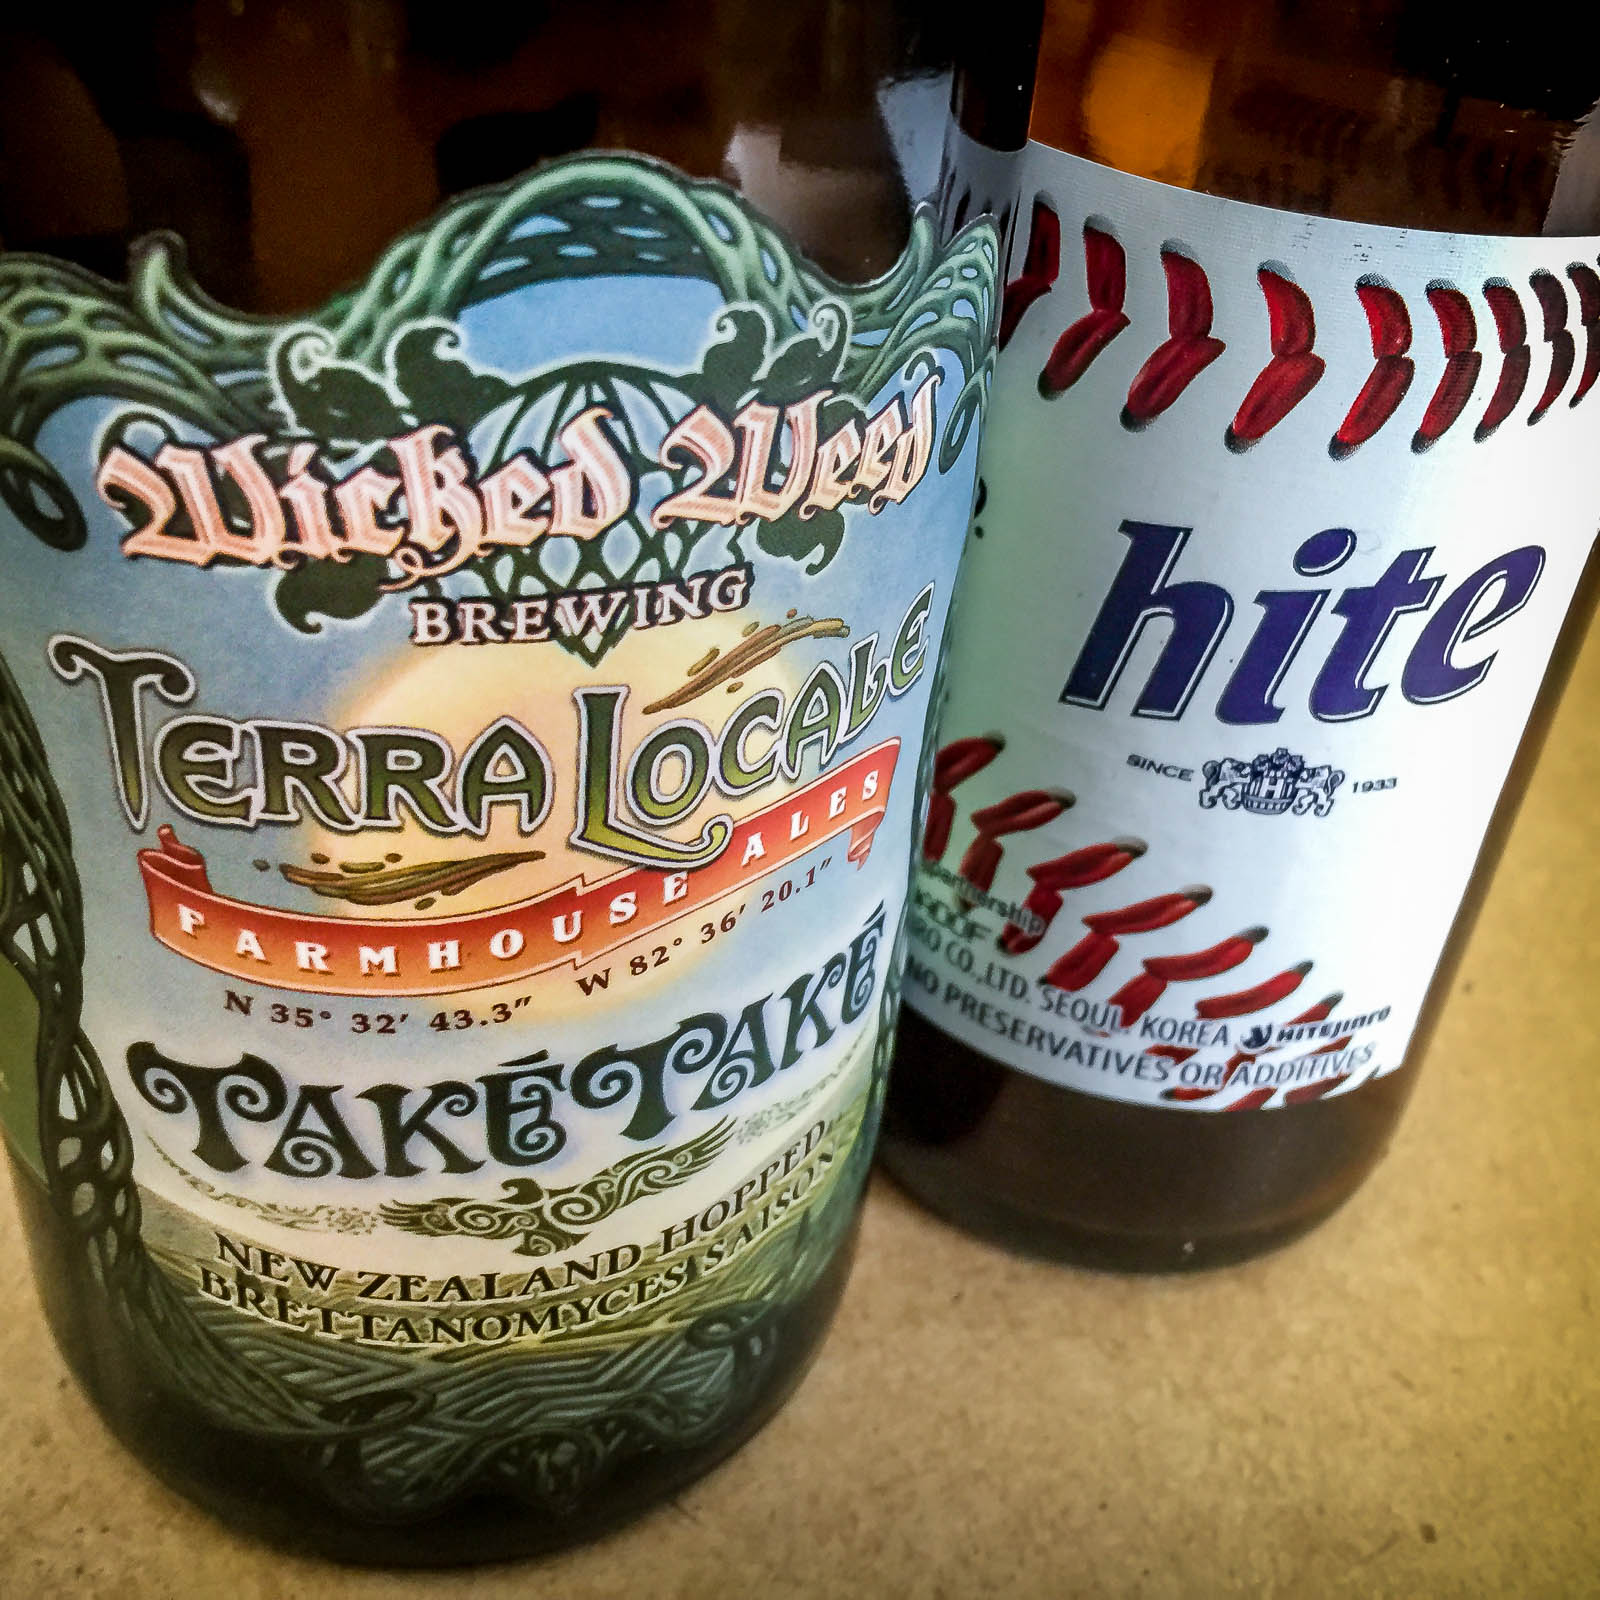 Wicked Weed and...Hite...